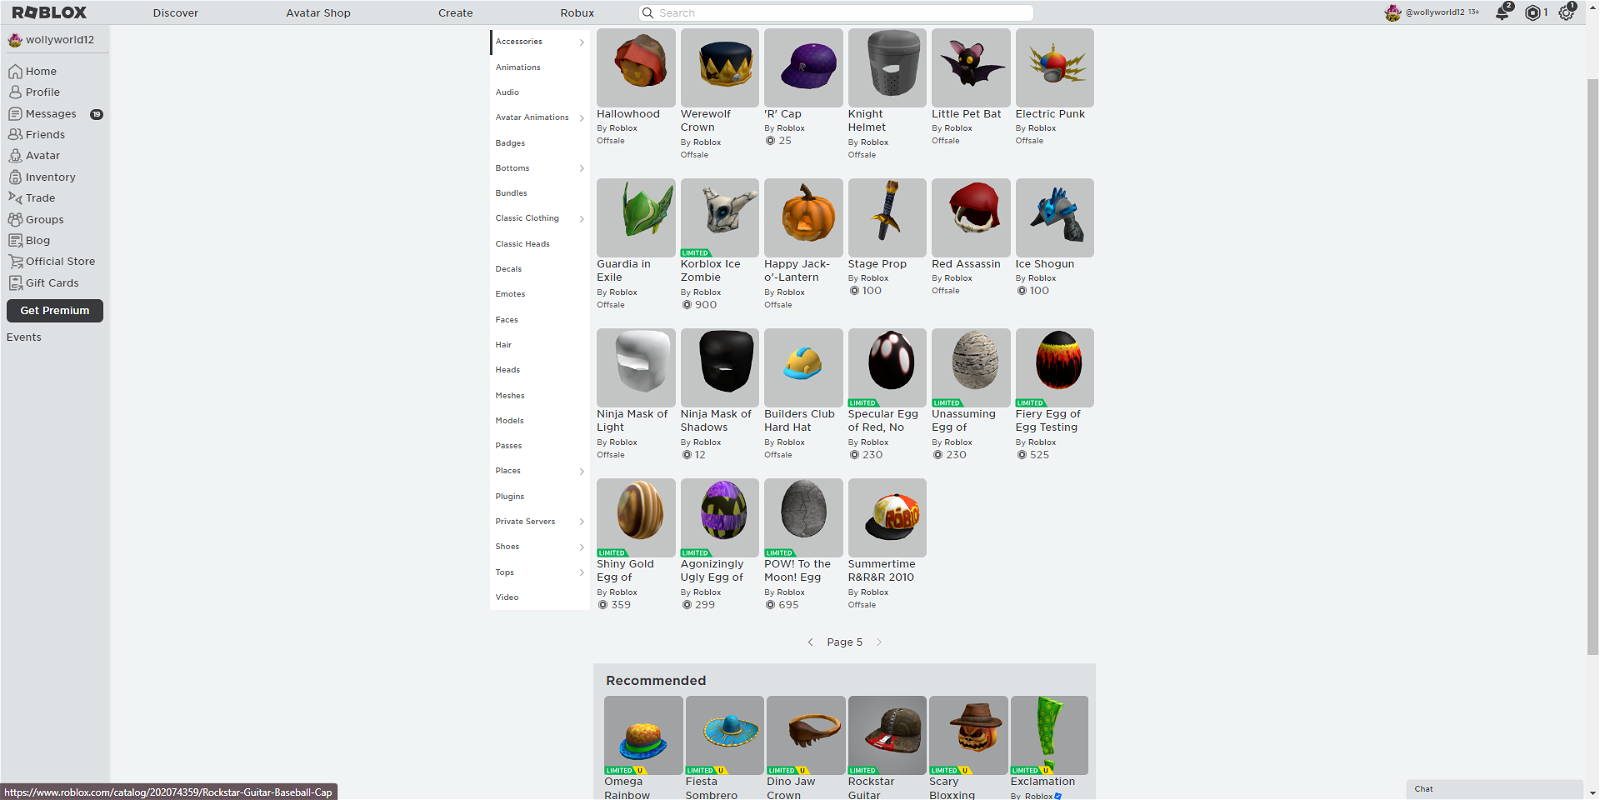 Selling Roblox account! 24k+ robux worth of limited edition items